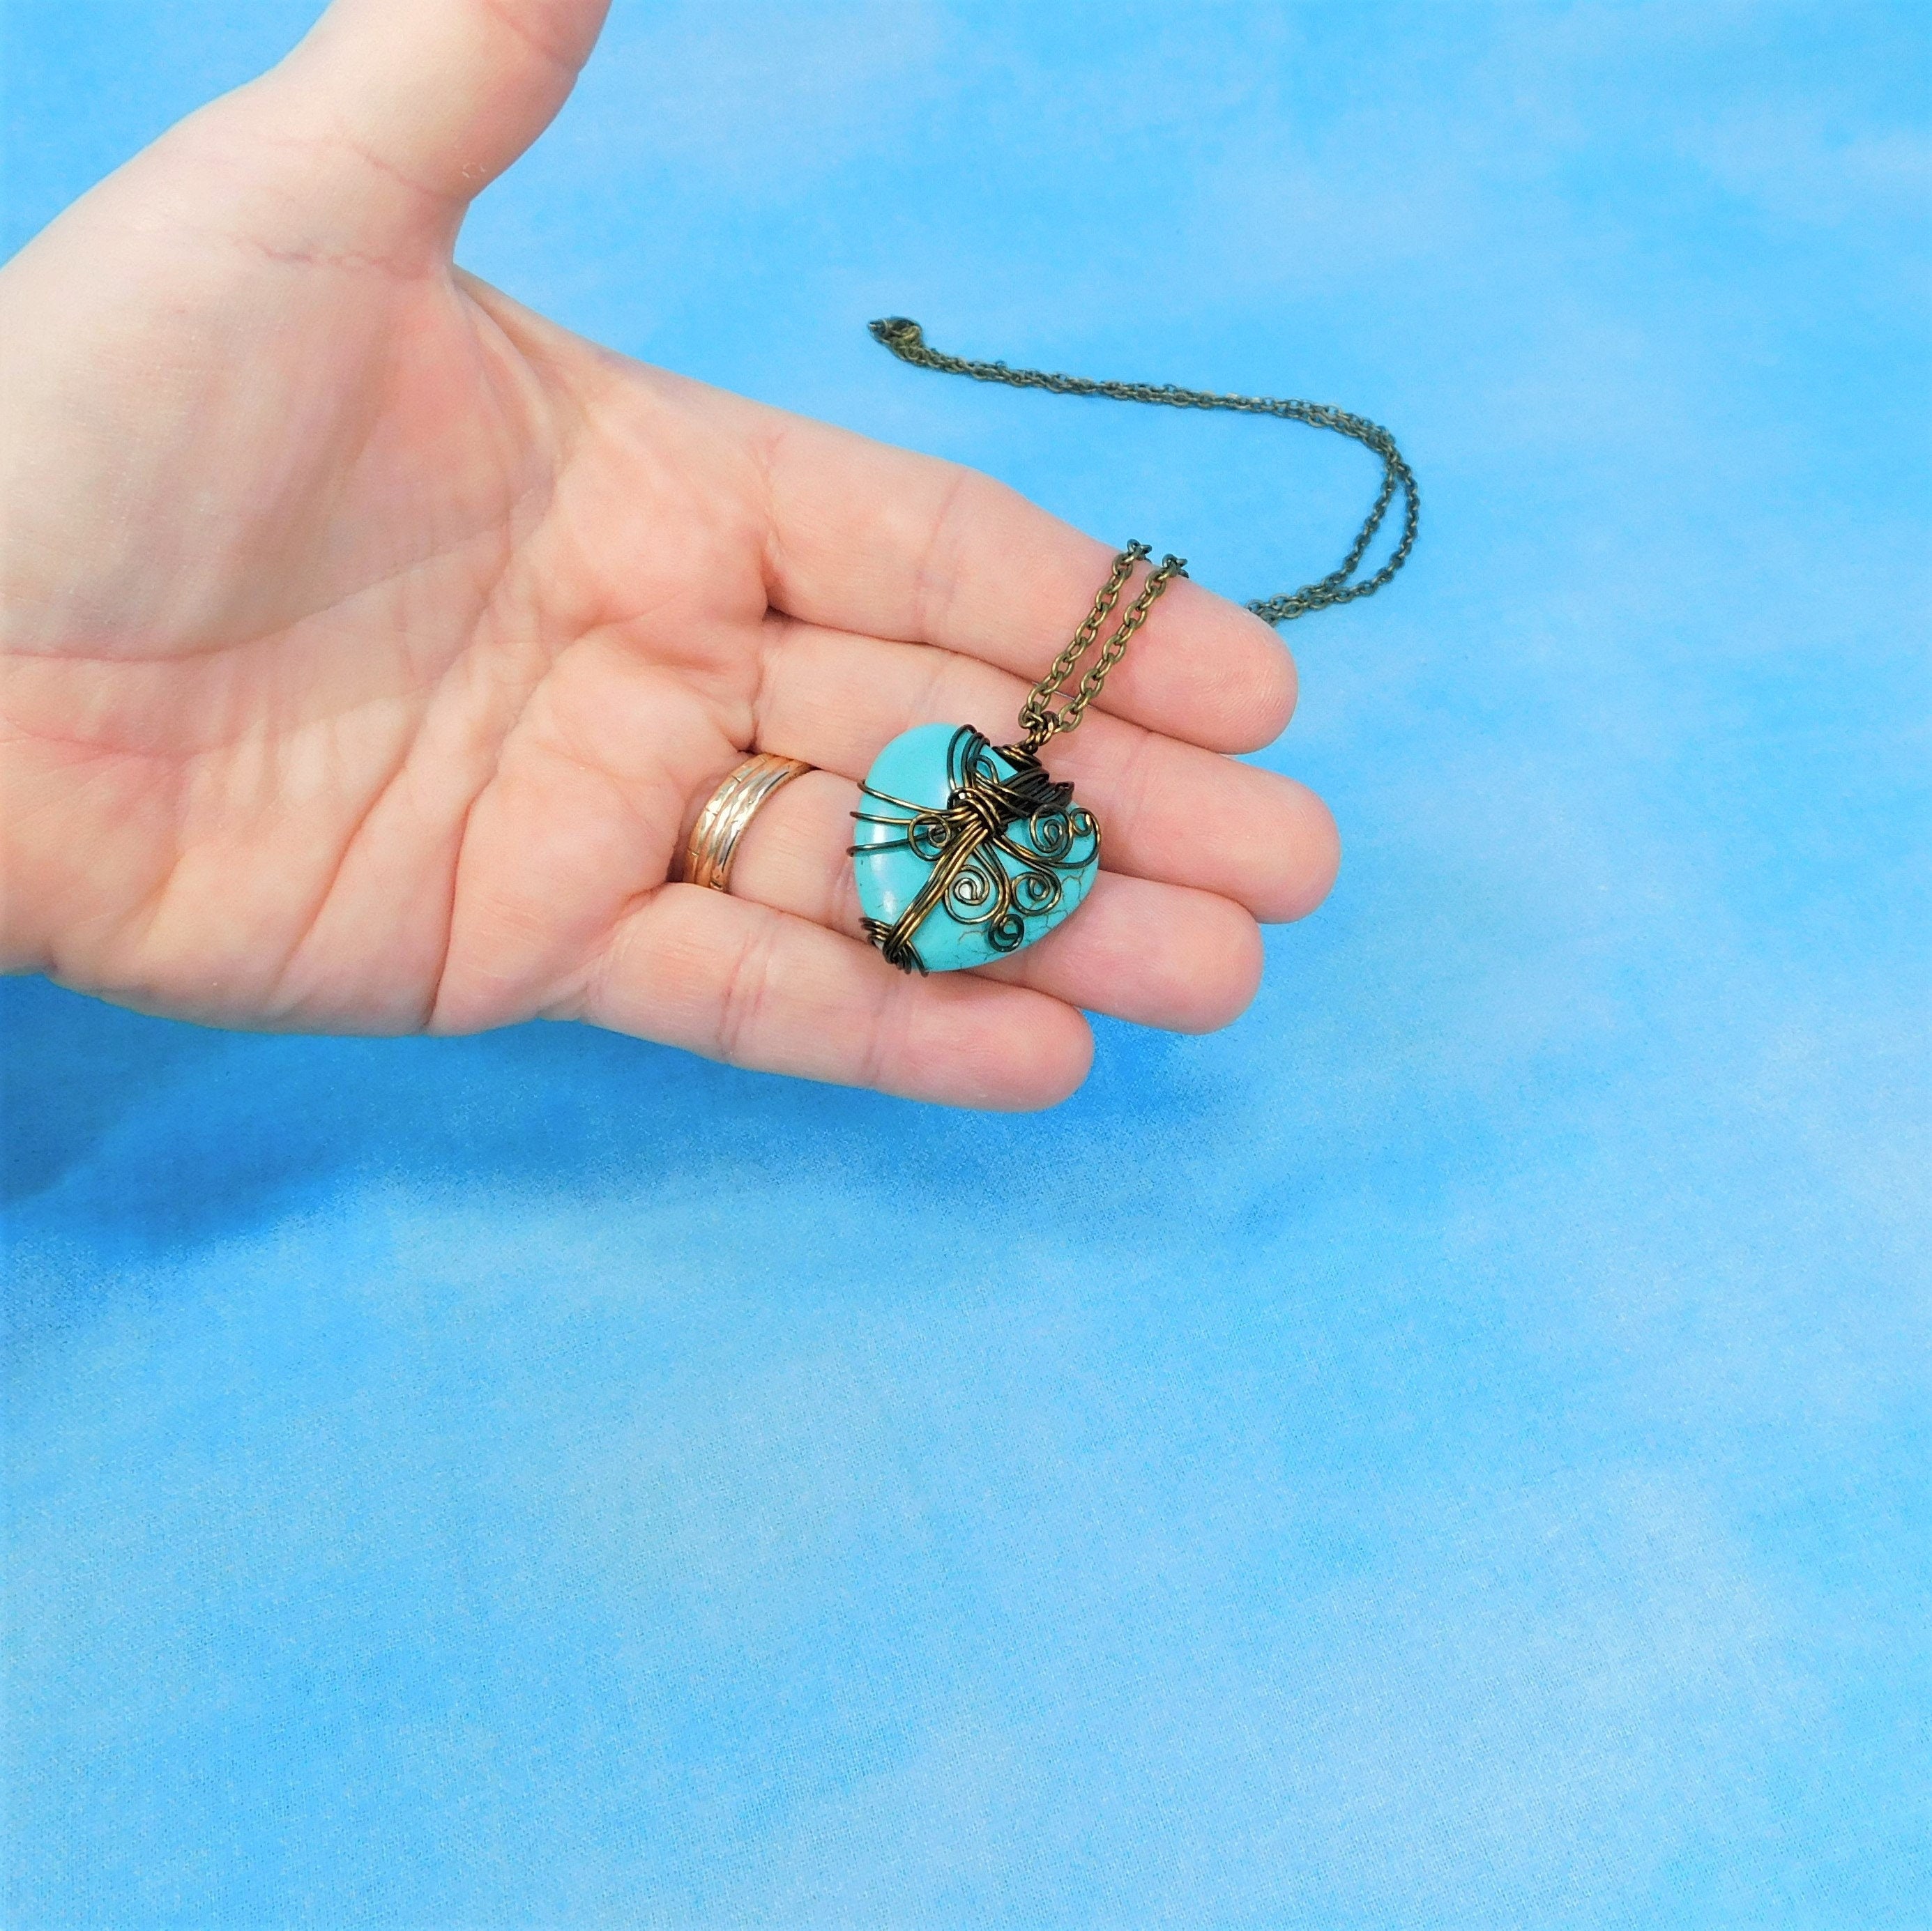 Large Wire Wrapped Gemstone Heart Pendant Handmade Wearable Art Jewelry for Women Unique Artisan Crafted Turquoise Blue Stone Necklace